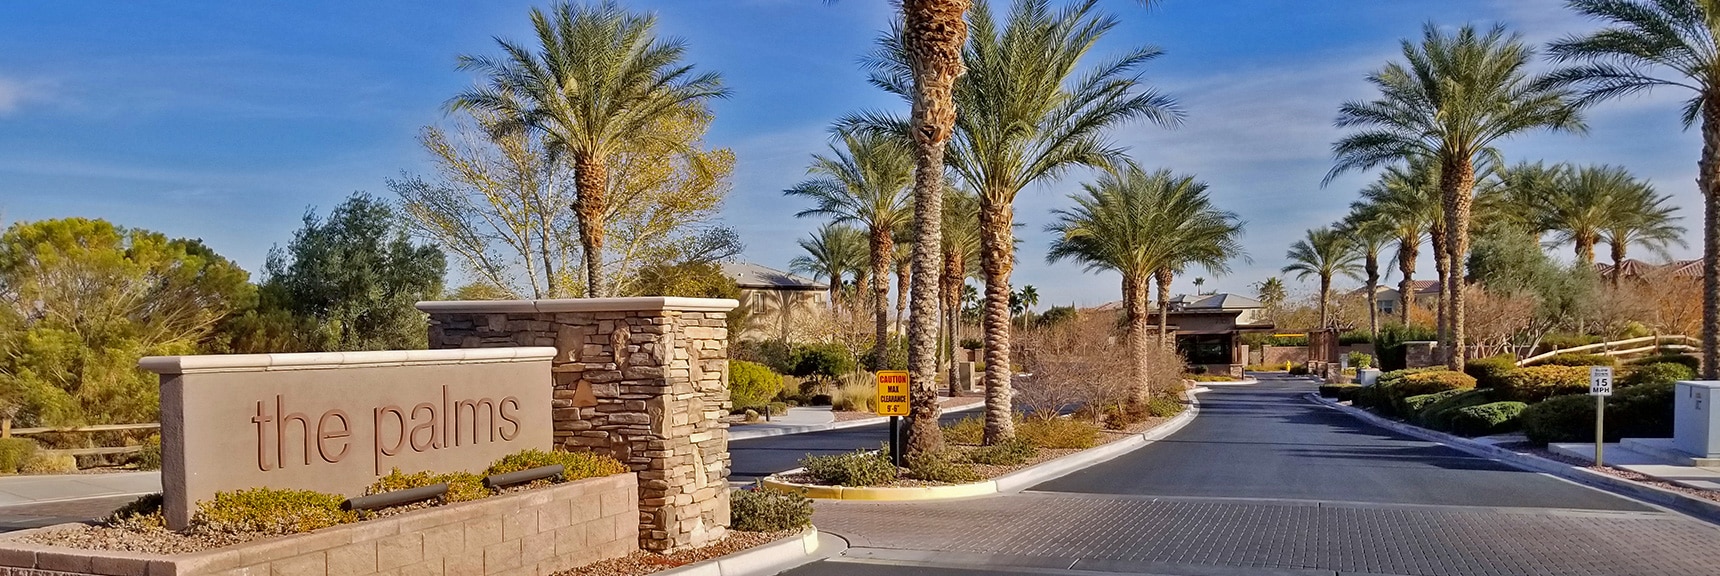 Entrance of The Palms | Snapshot of Las Vegas Northern Growth Edge on January 3, 2021